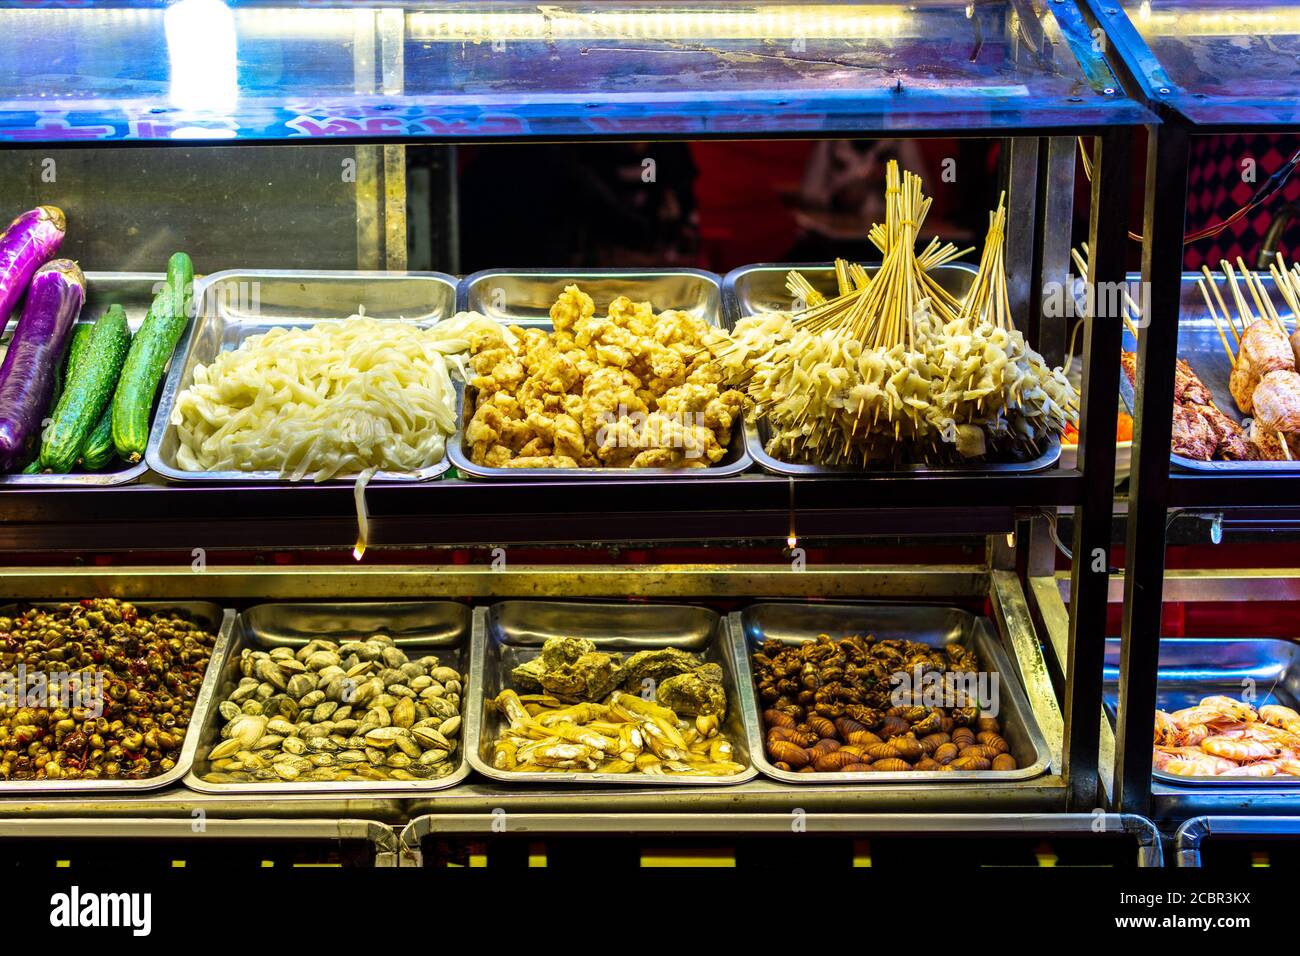 Street market food stall in Luoyang Old City, Luoyang, Henan Province, China. Stock Photo